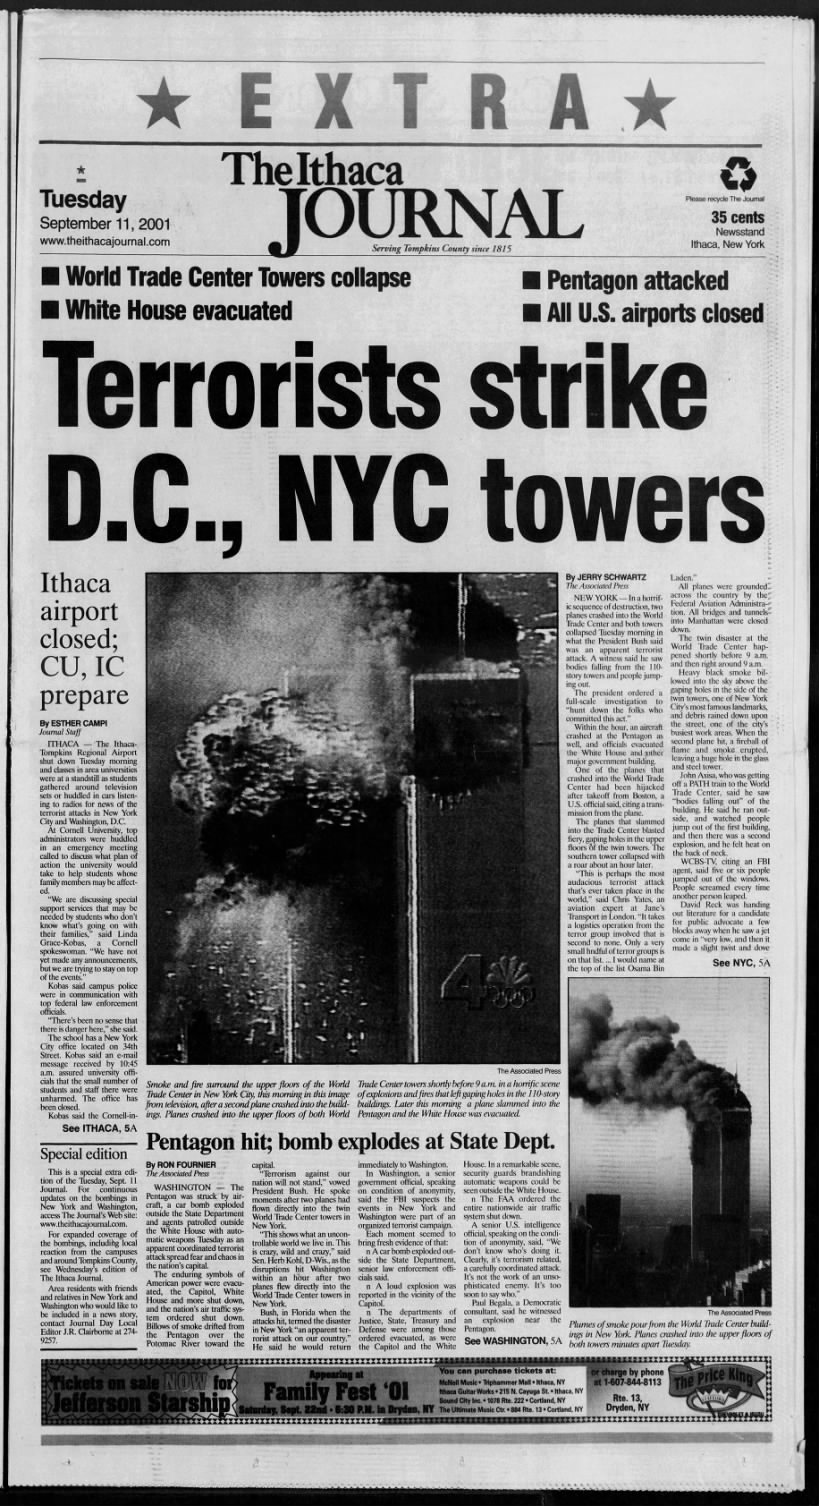 Front page news coverage of the September 11th (9/11) terrorist attacks